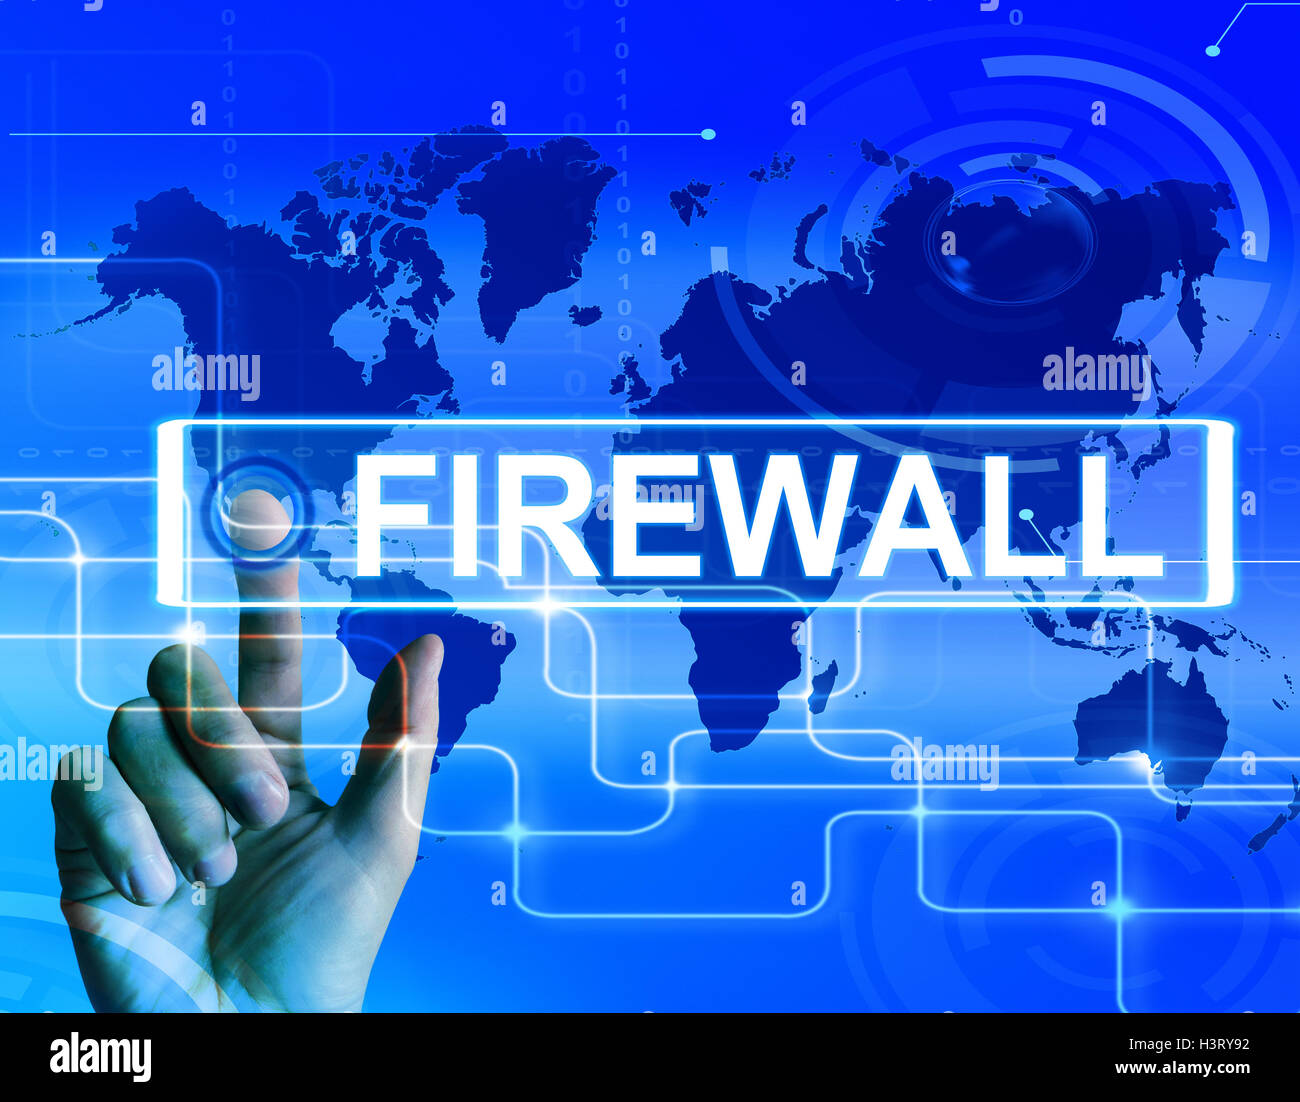 Firewall Map Displays Internet Safety Security and Protection Stock Photo